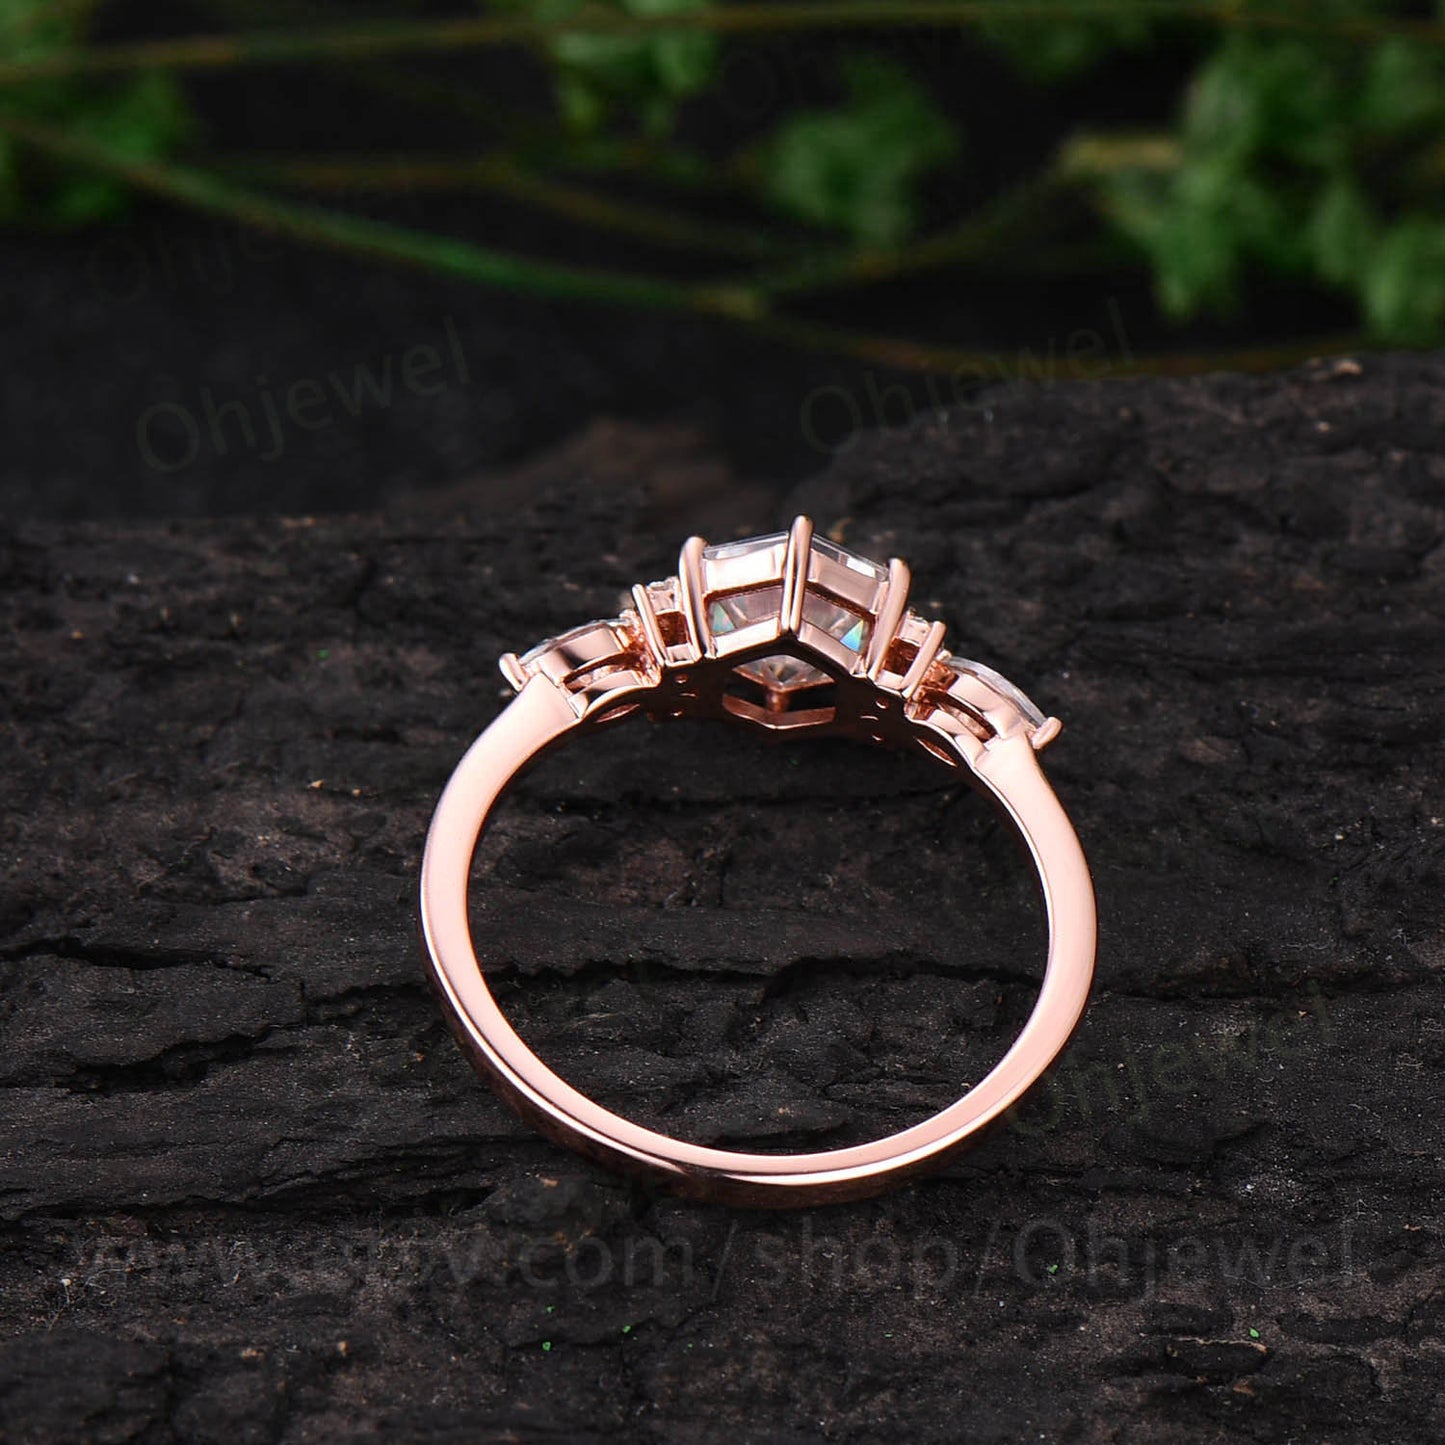 Morganite ring vintage Hexagon cut pink morganite engagement ring 14k rose gold marquise cut diamond ring for women unique promise ring her